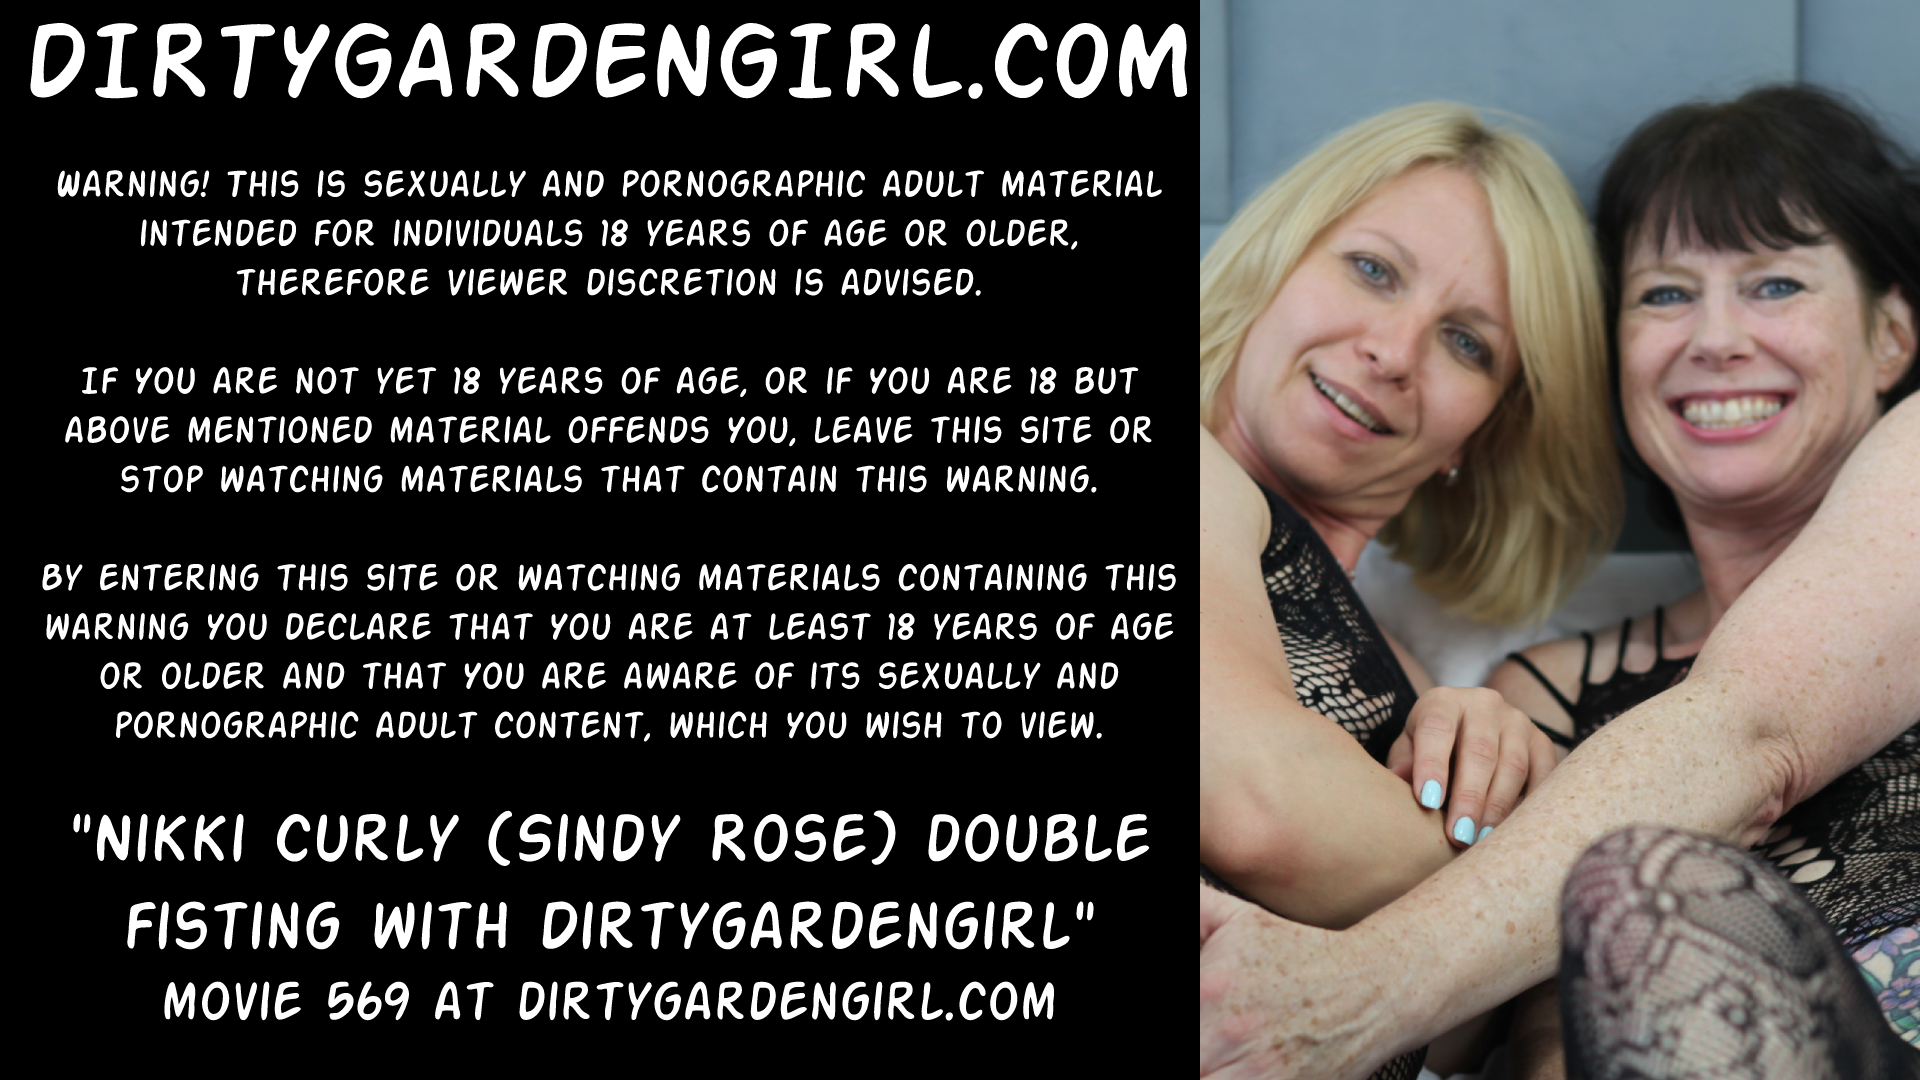 Nikki Curly (aka Sindy Rose) double fisting with Dirtygardengirl